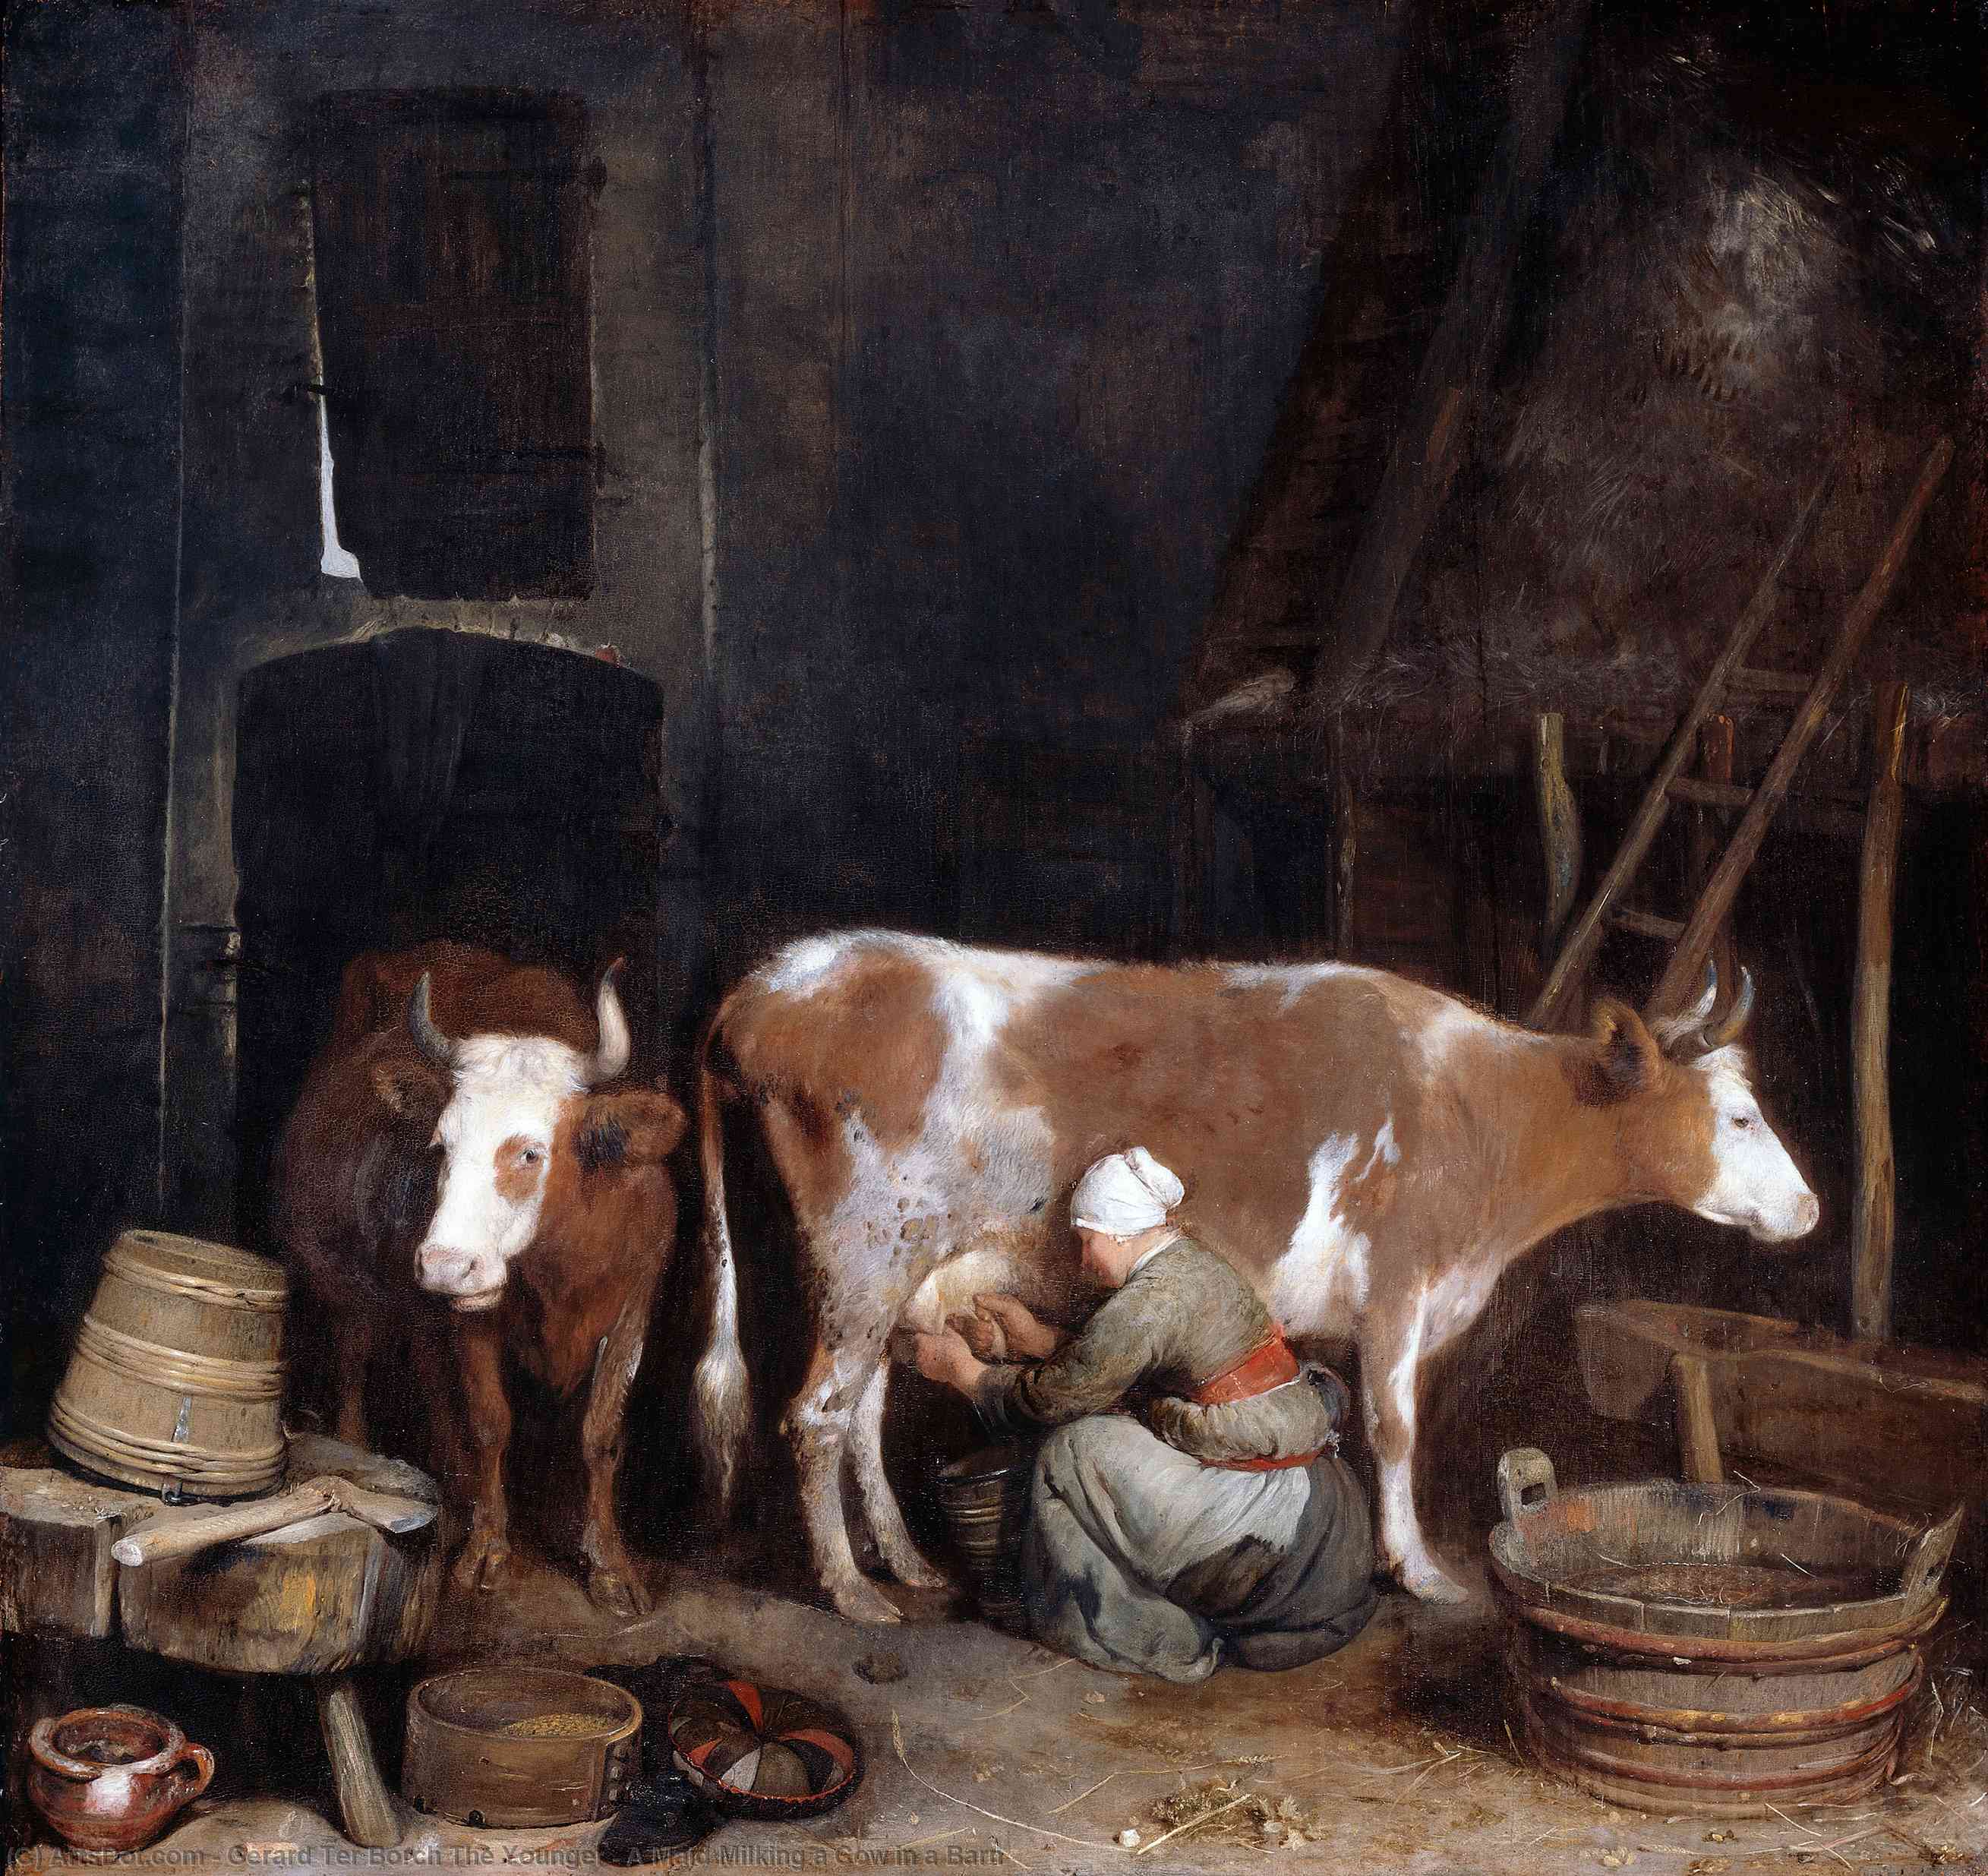 Wikioo.org - สารานุกรมวิจิตรศิลป์ - จิตรกรรม Gerard Ter Borch The Younger - A Maid Milking a Cow in a Barn